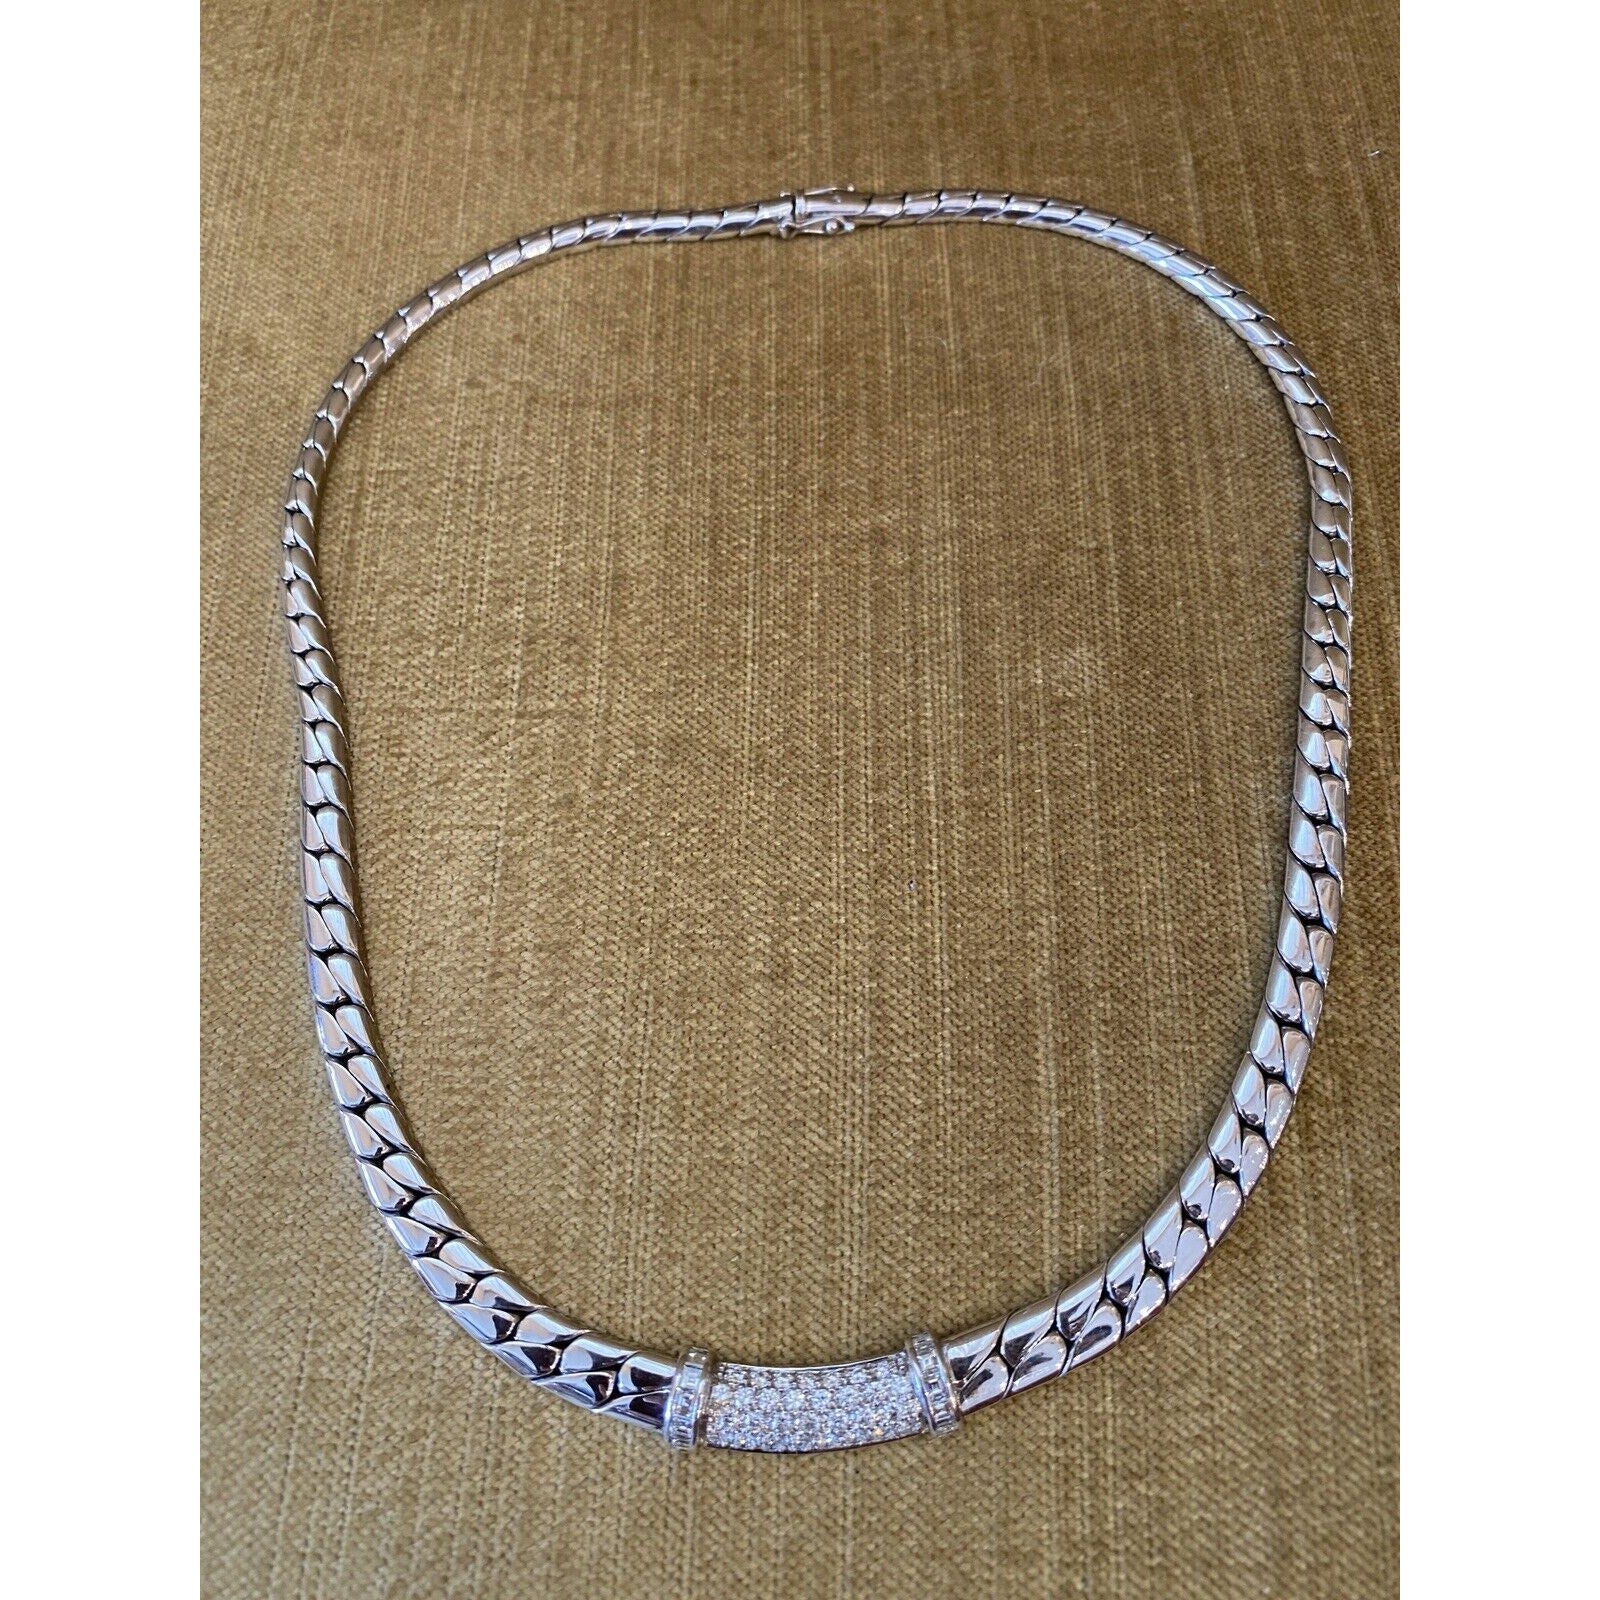 PICCHIOTTI Pave Diamond Curb Link Necklace in 18k White Gold- HM2307BR